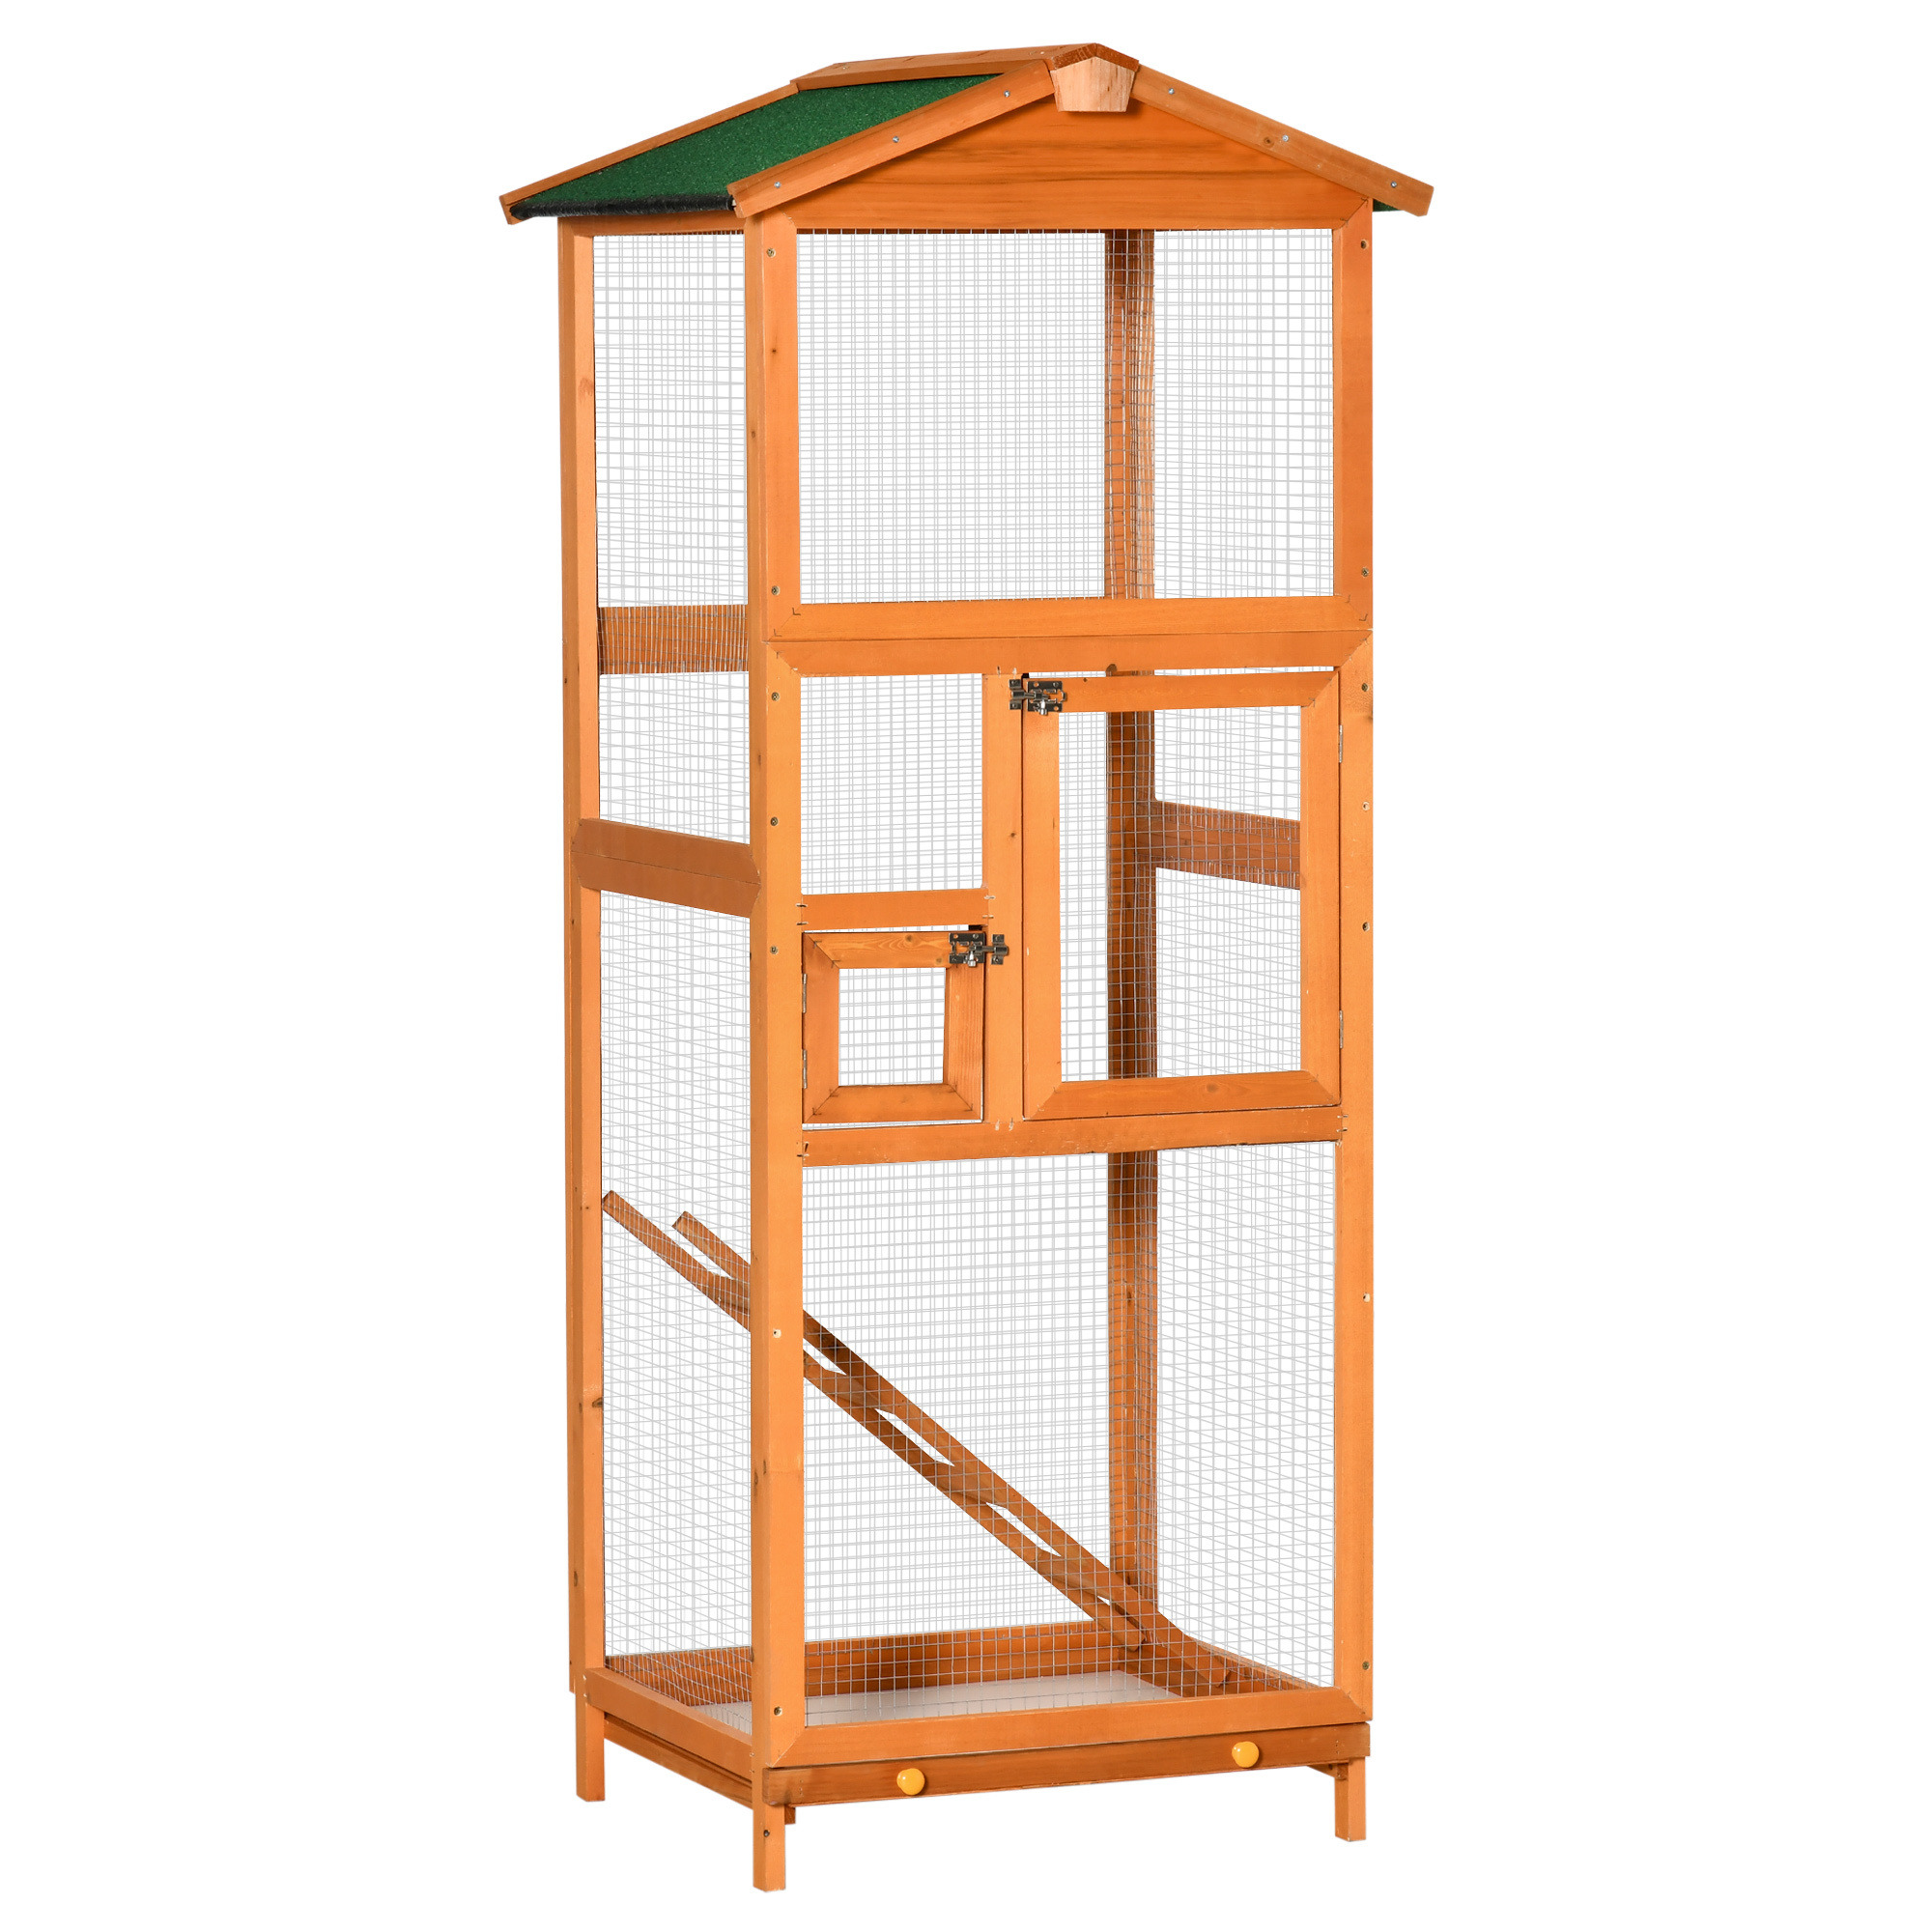 PawHut Wooden Bird Aviary Cages Outdoor Finches Birdcage with Pull Out Tray 2 Doors, Orange